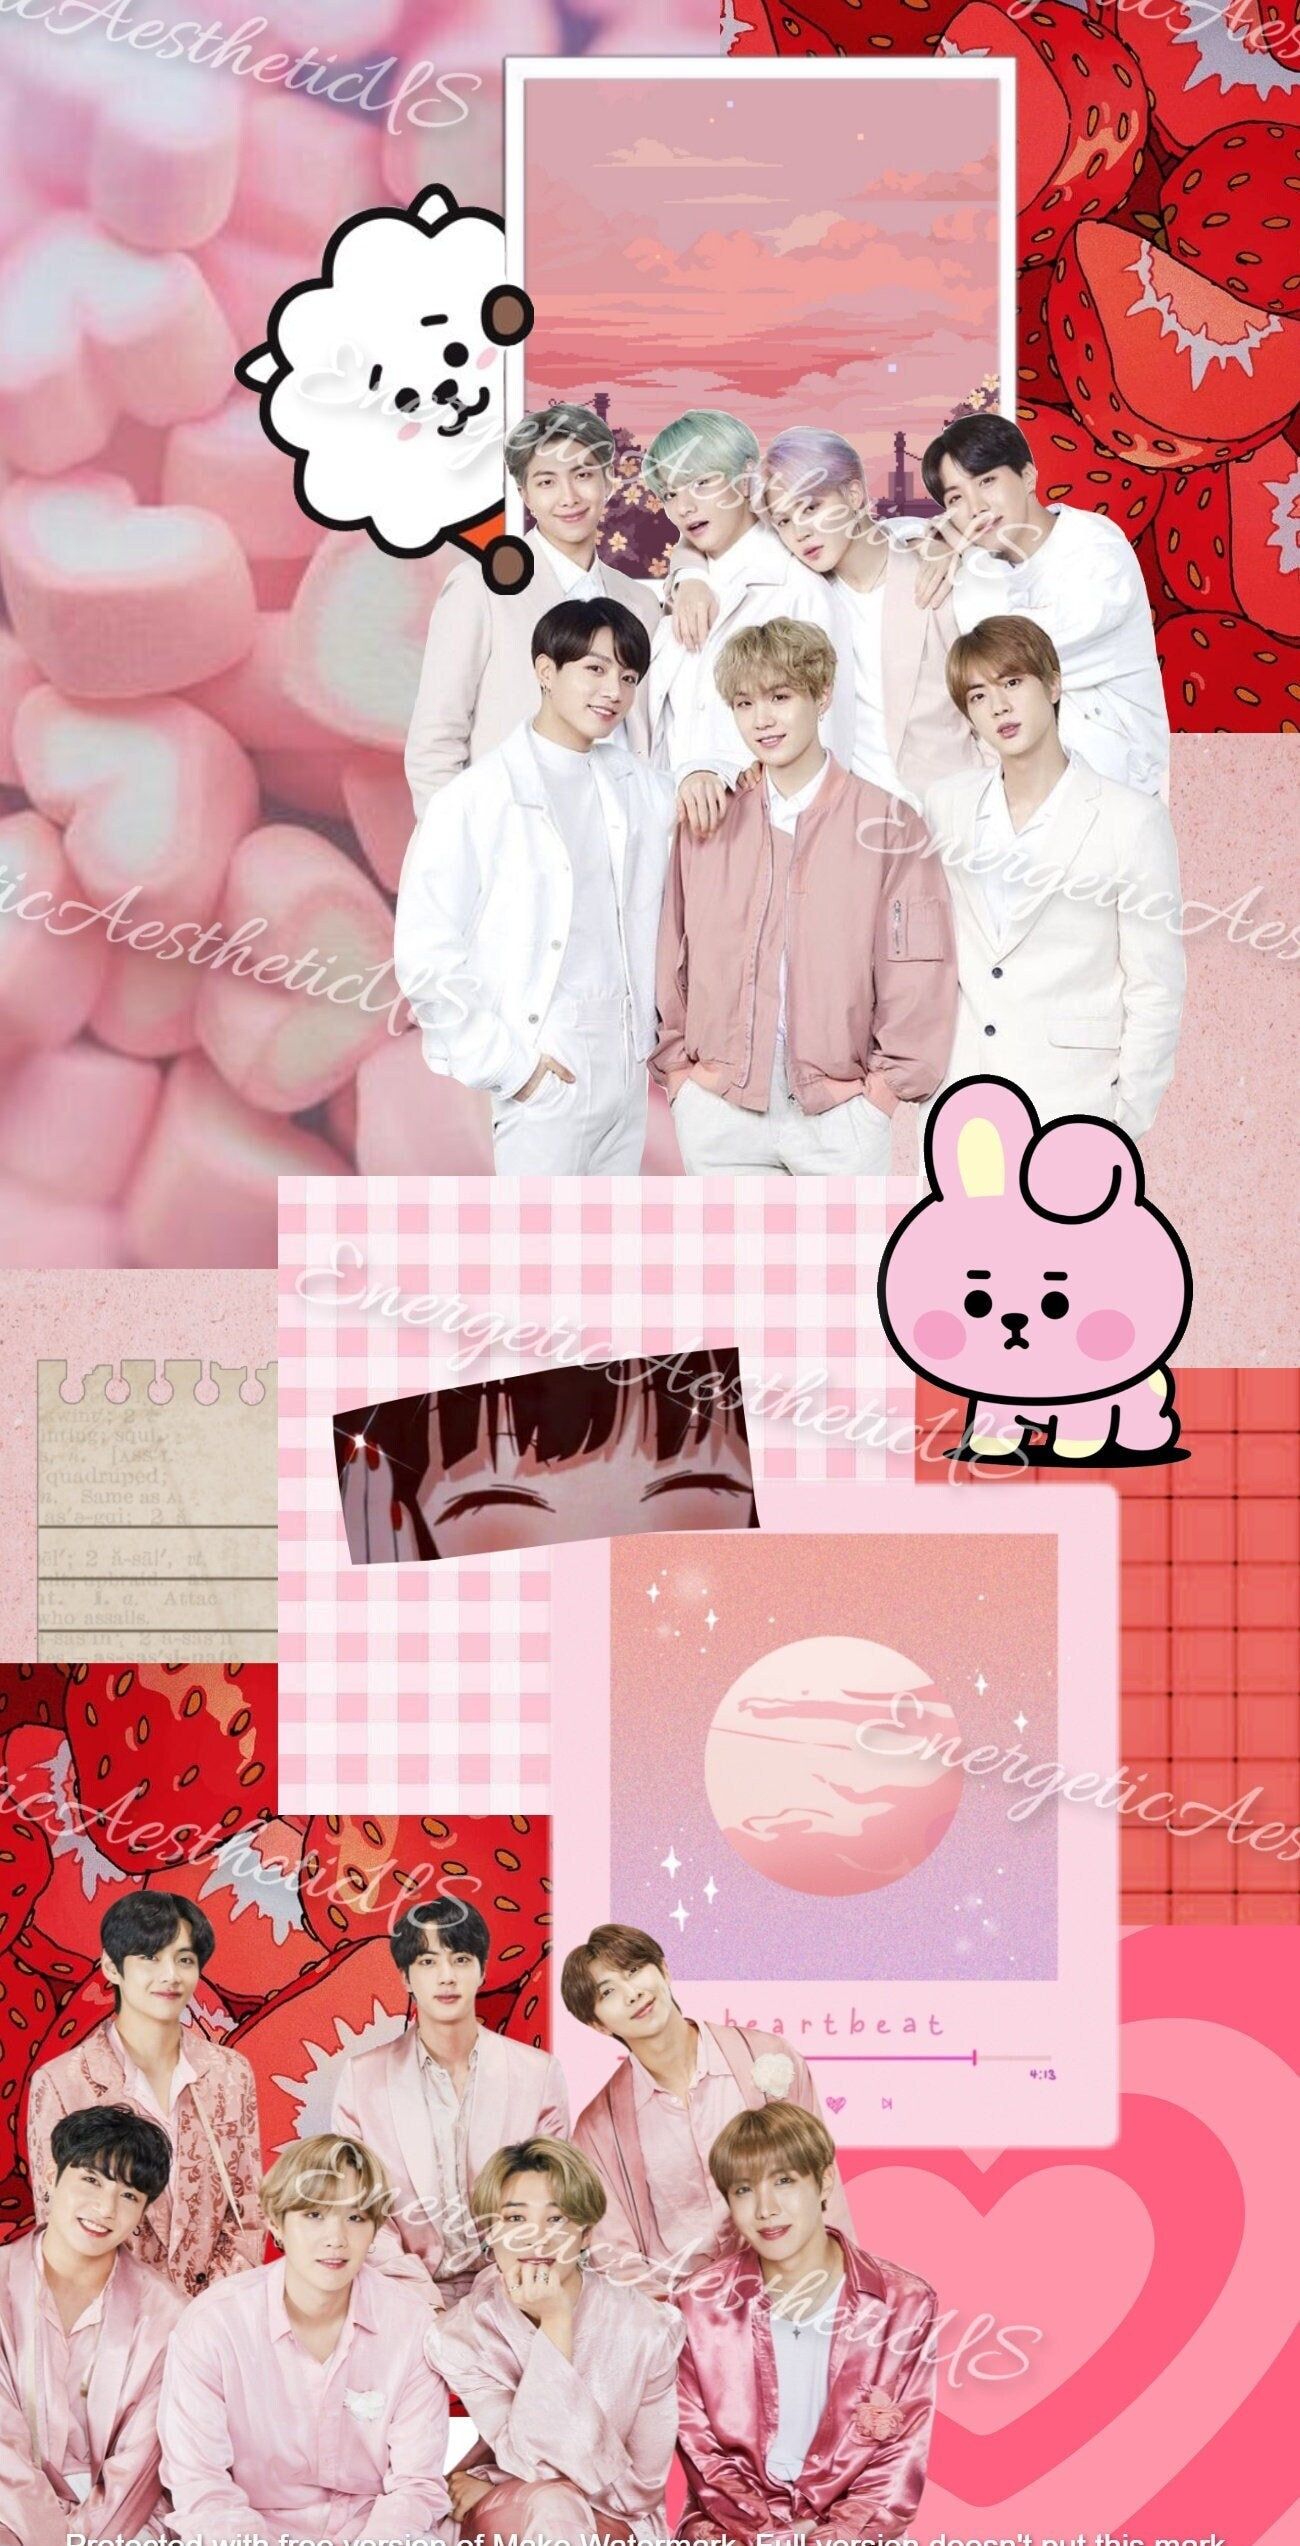 Bts Pink Aesthetic Wallpaper for iPhone with high-resolution 1080x1920 pixel. You can use this wallpaper for your iPhone 5, 6, 7, 8, X, XS, XR backgrounds, Mobile Screensaver, or iPad Lock Screen - Pink phone